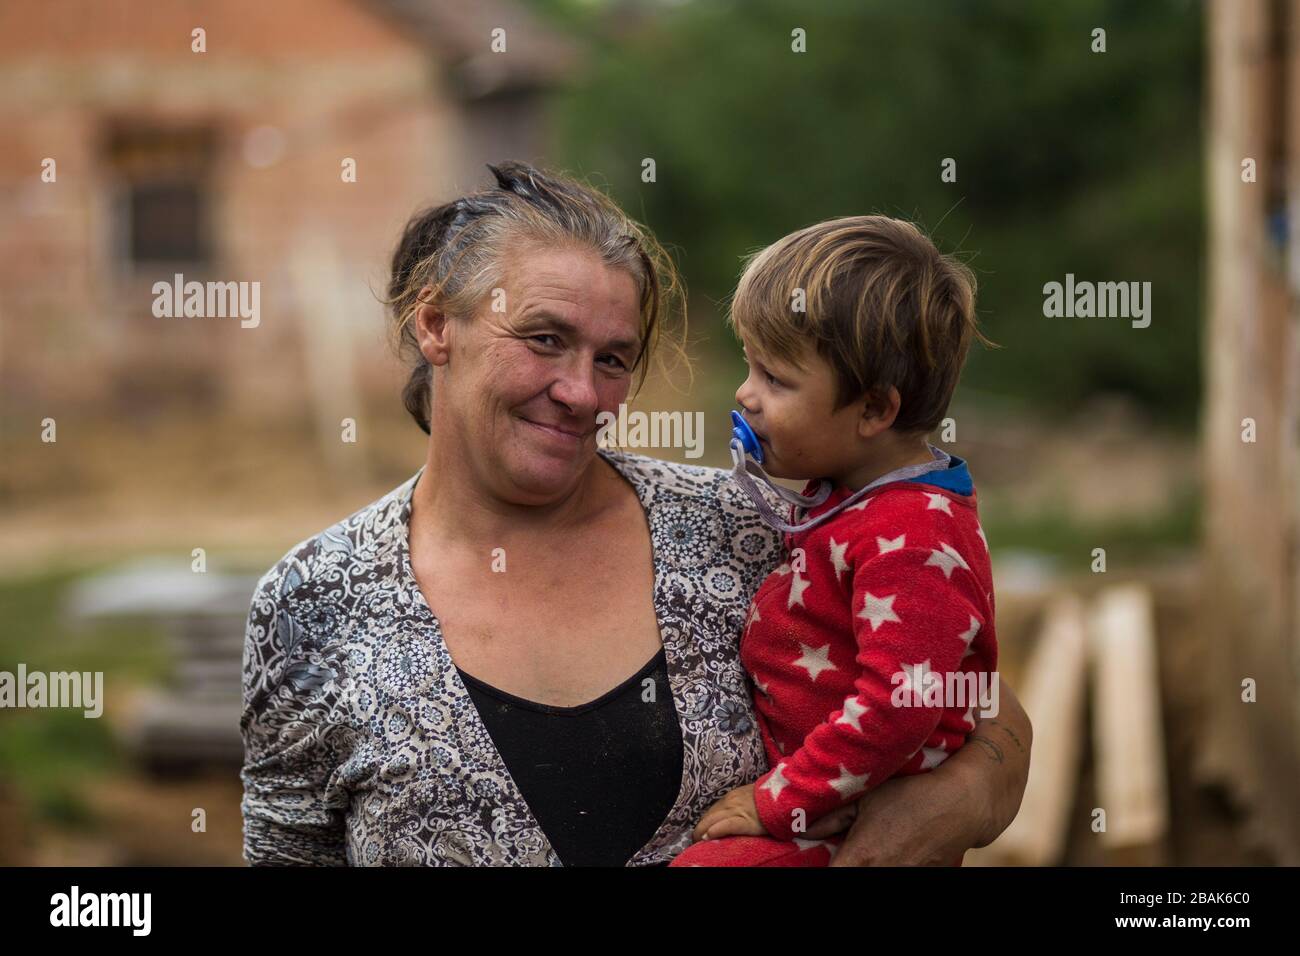 Woman with her grandchild in a poor roma / gypsy community in rural Hungary Stock Photo